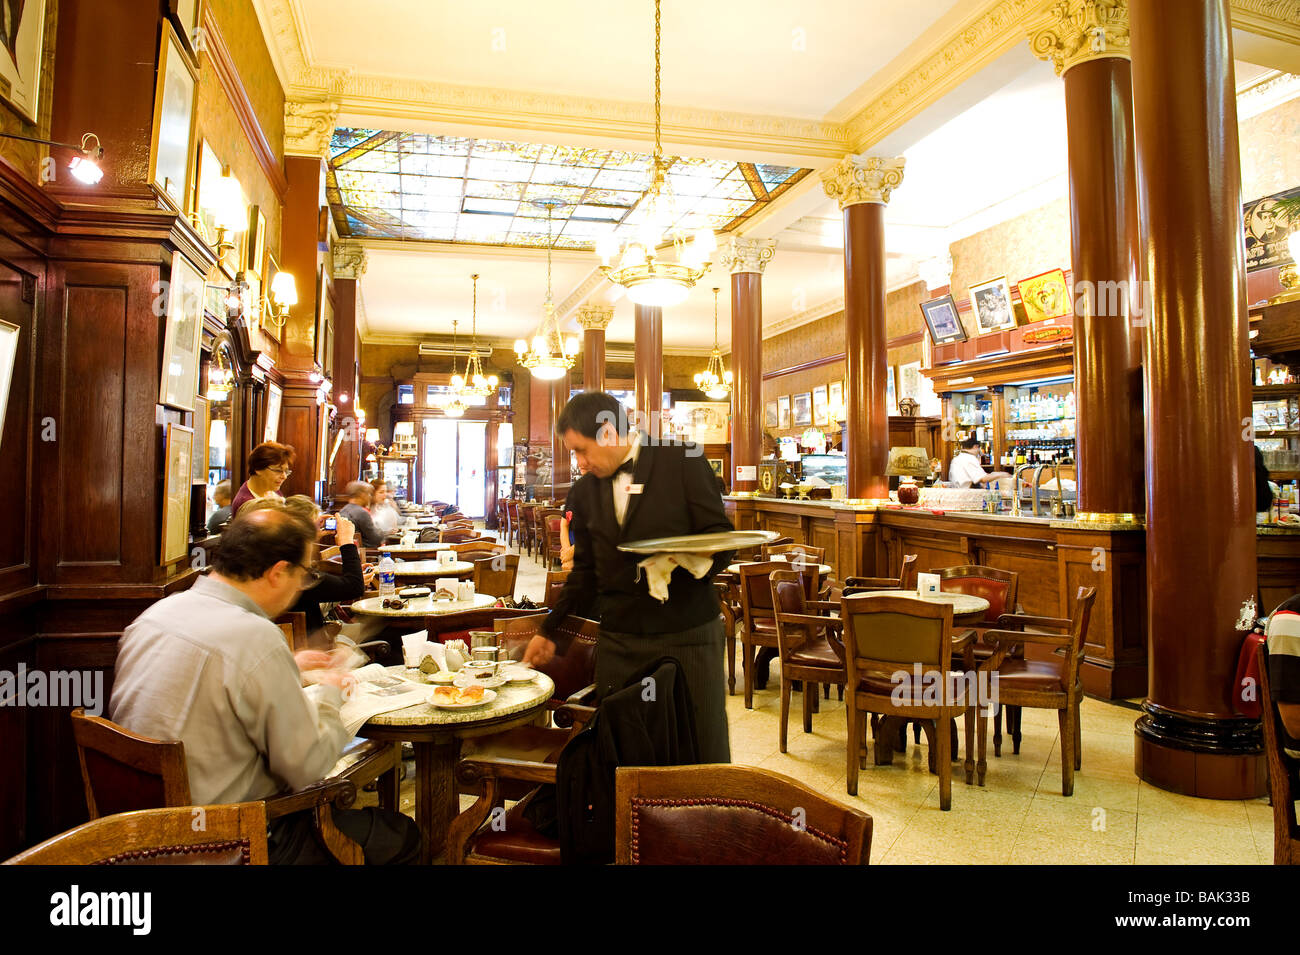 Argentinien, Buenos Aires, Tortini Cafe Stockfoto